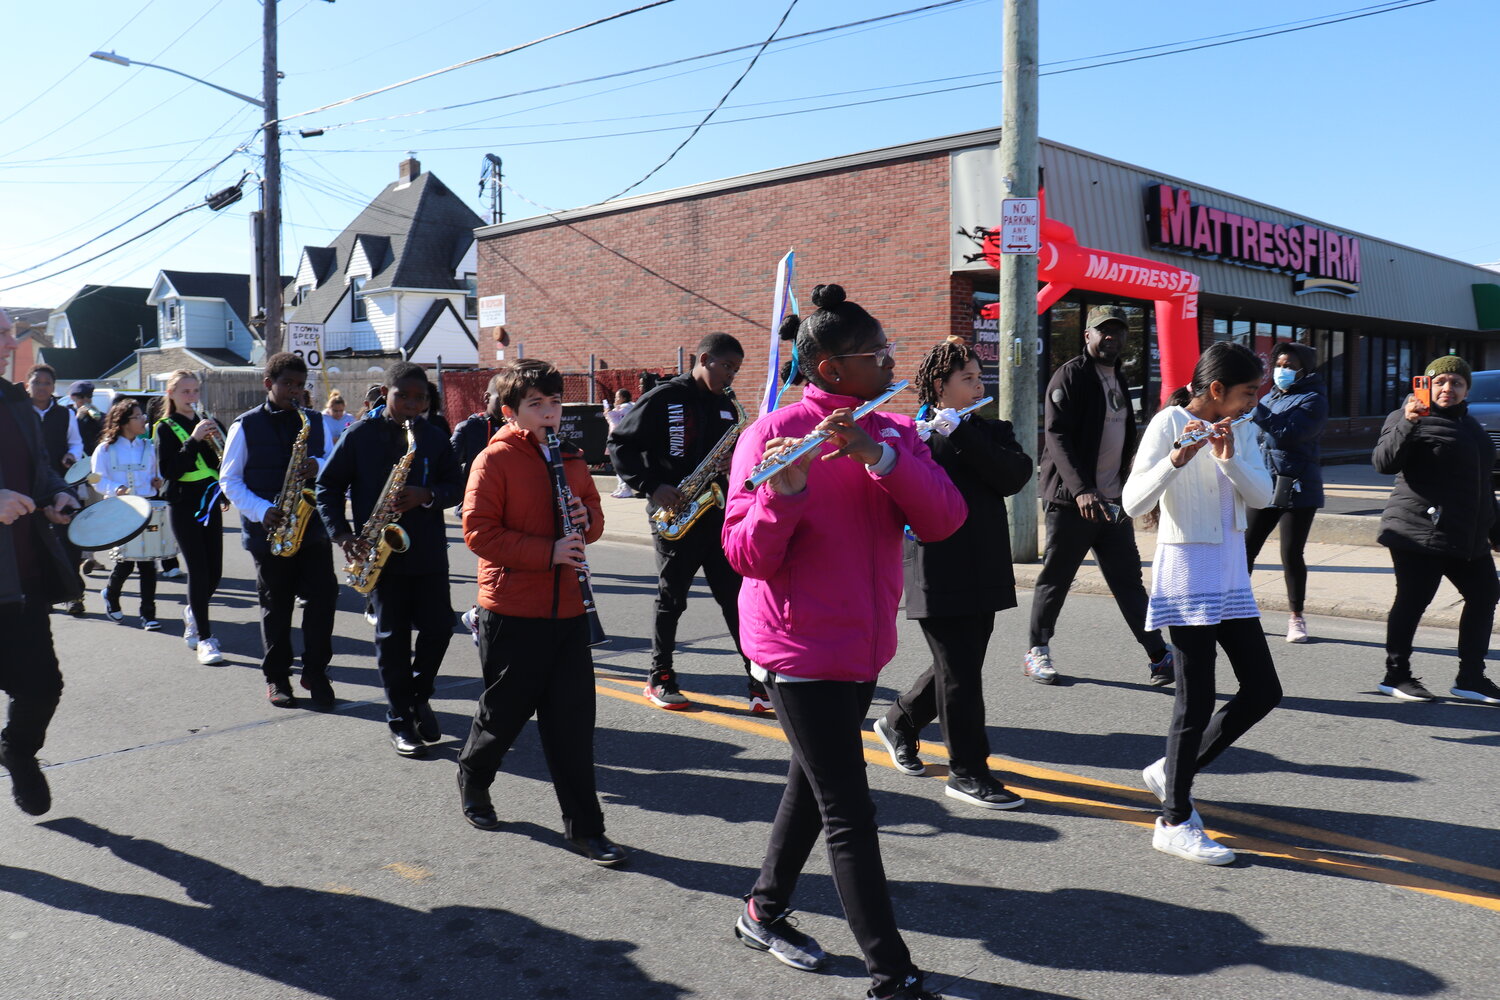 Students from the Elmont school district marching band performed during the parade precession on Nov. 11 from the Elmont Post 1033 to Veterans Square in Elmont.